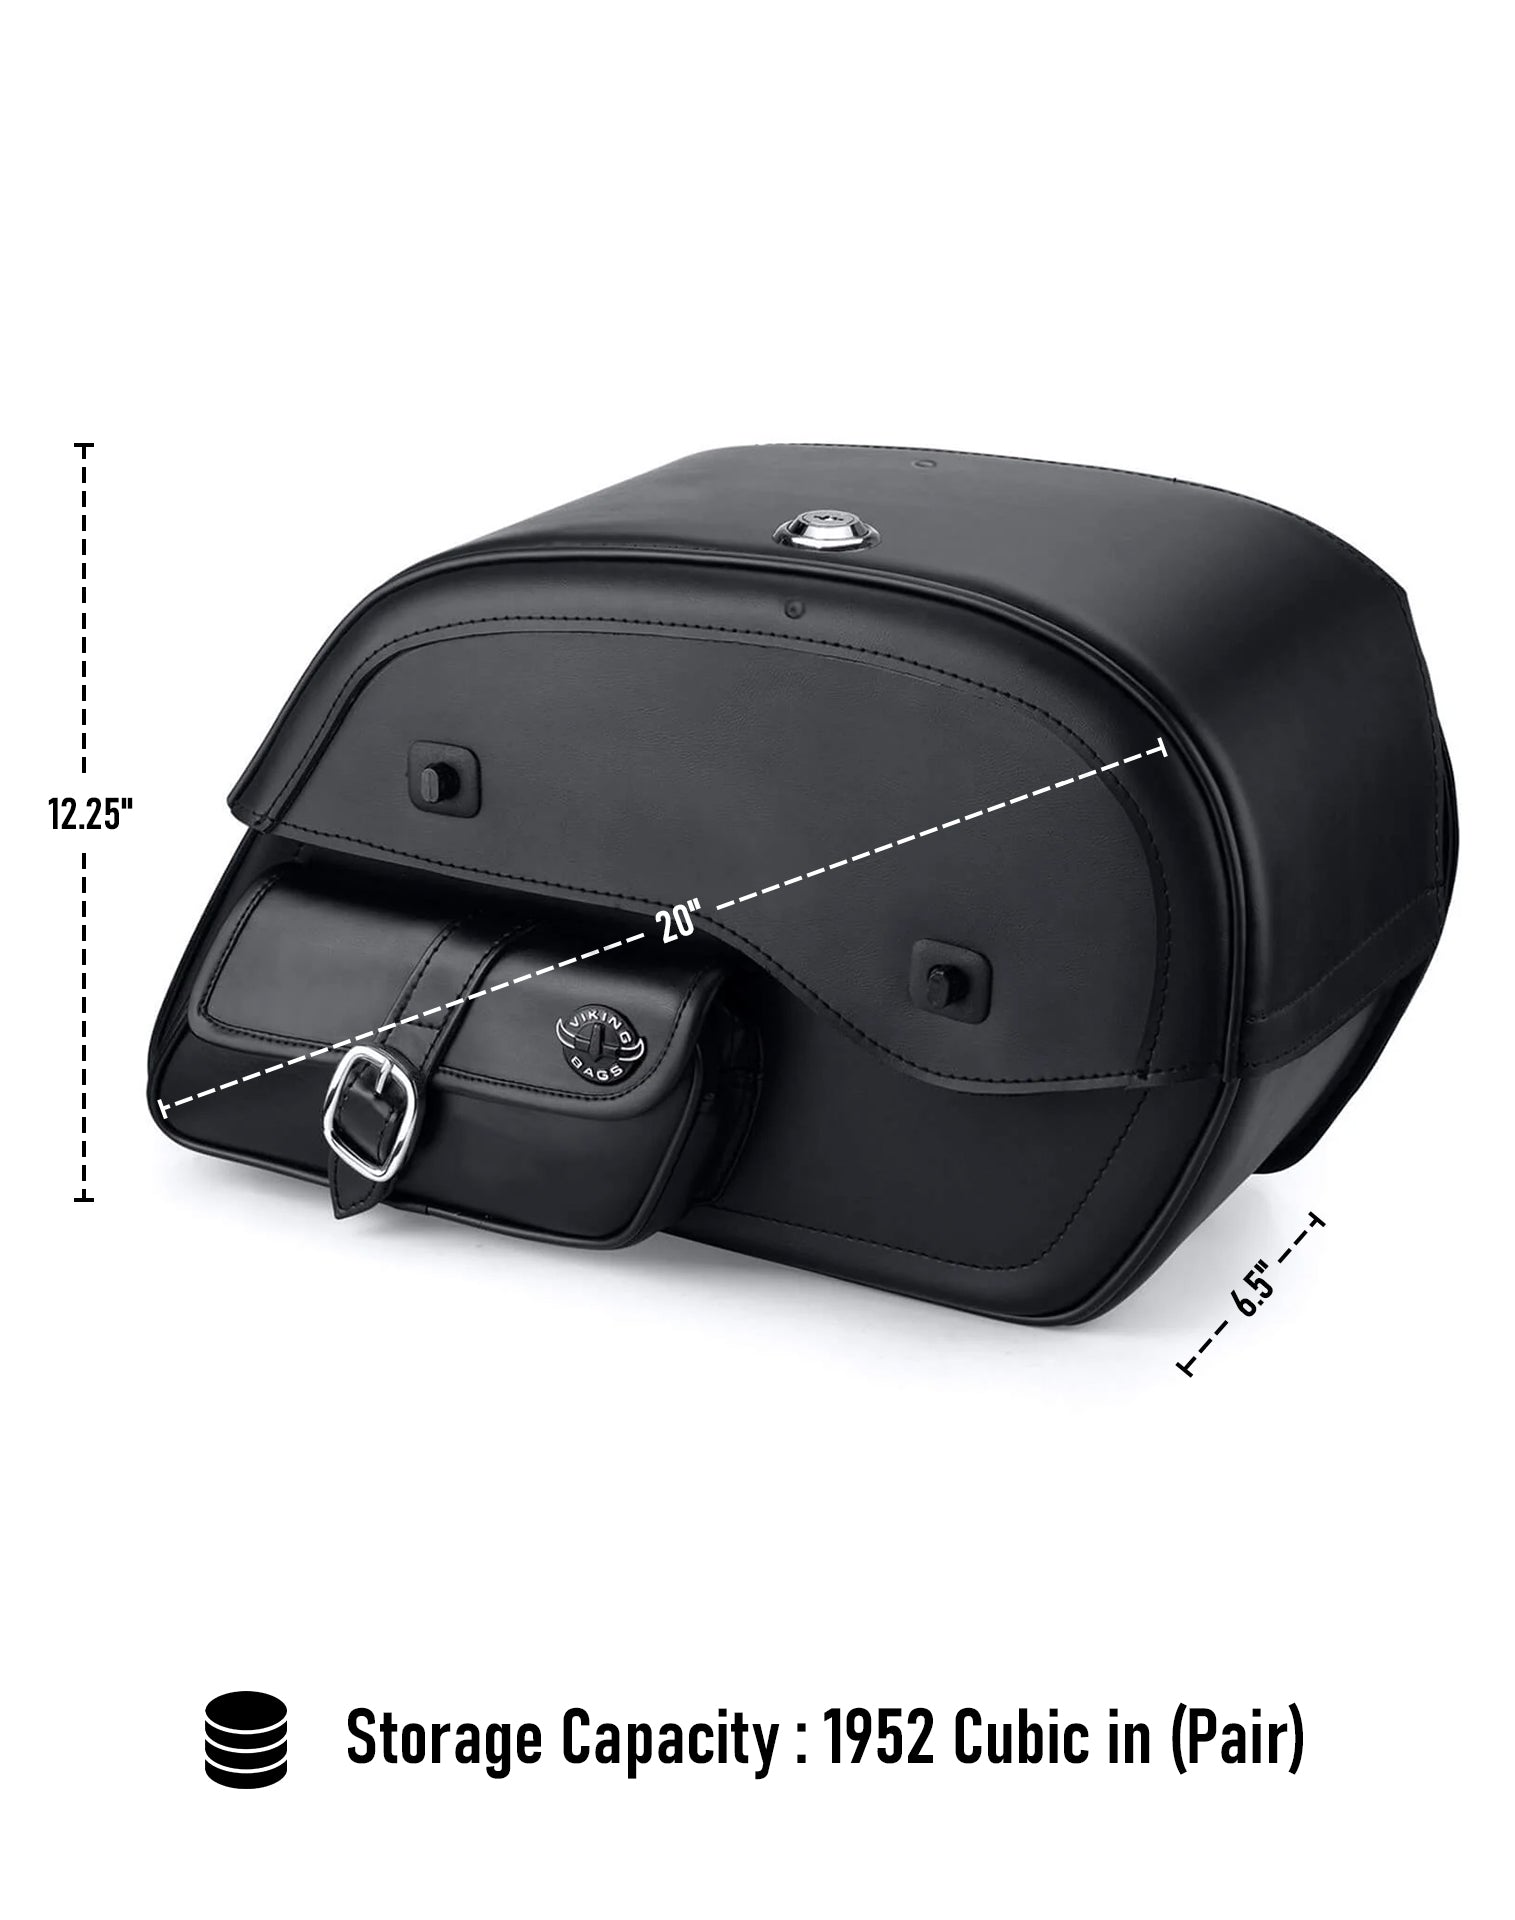 Viking Essential Side Pocket Large Kawasaki Mean Streak 1600 Leather Motorcycle Saddlebags Can Store Your Ridings Gears